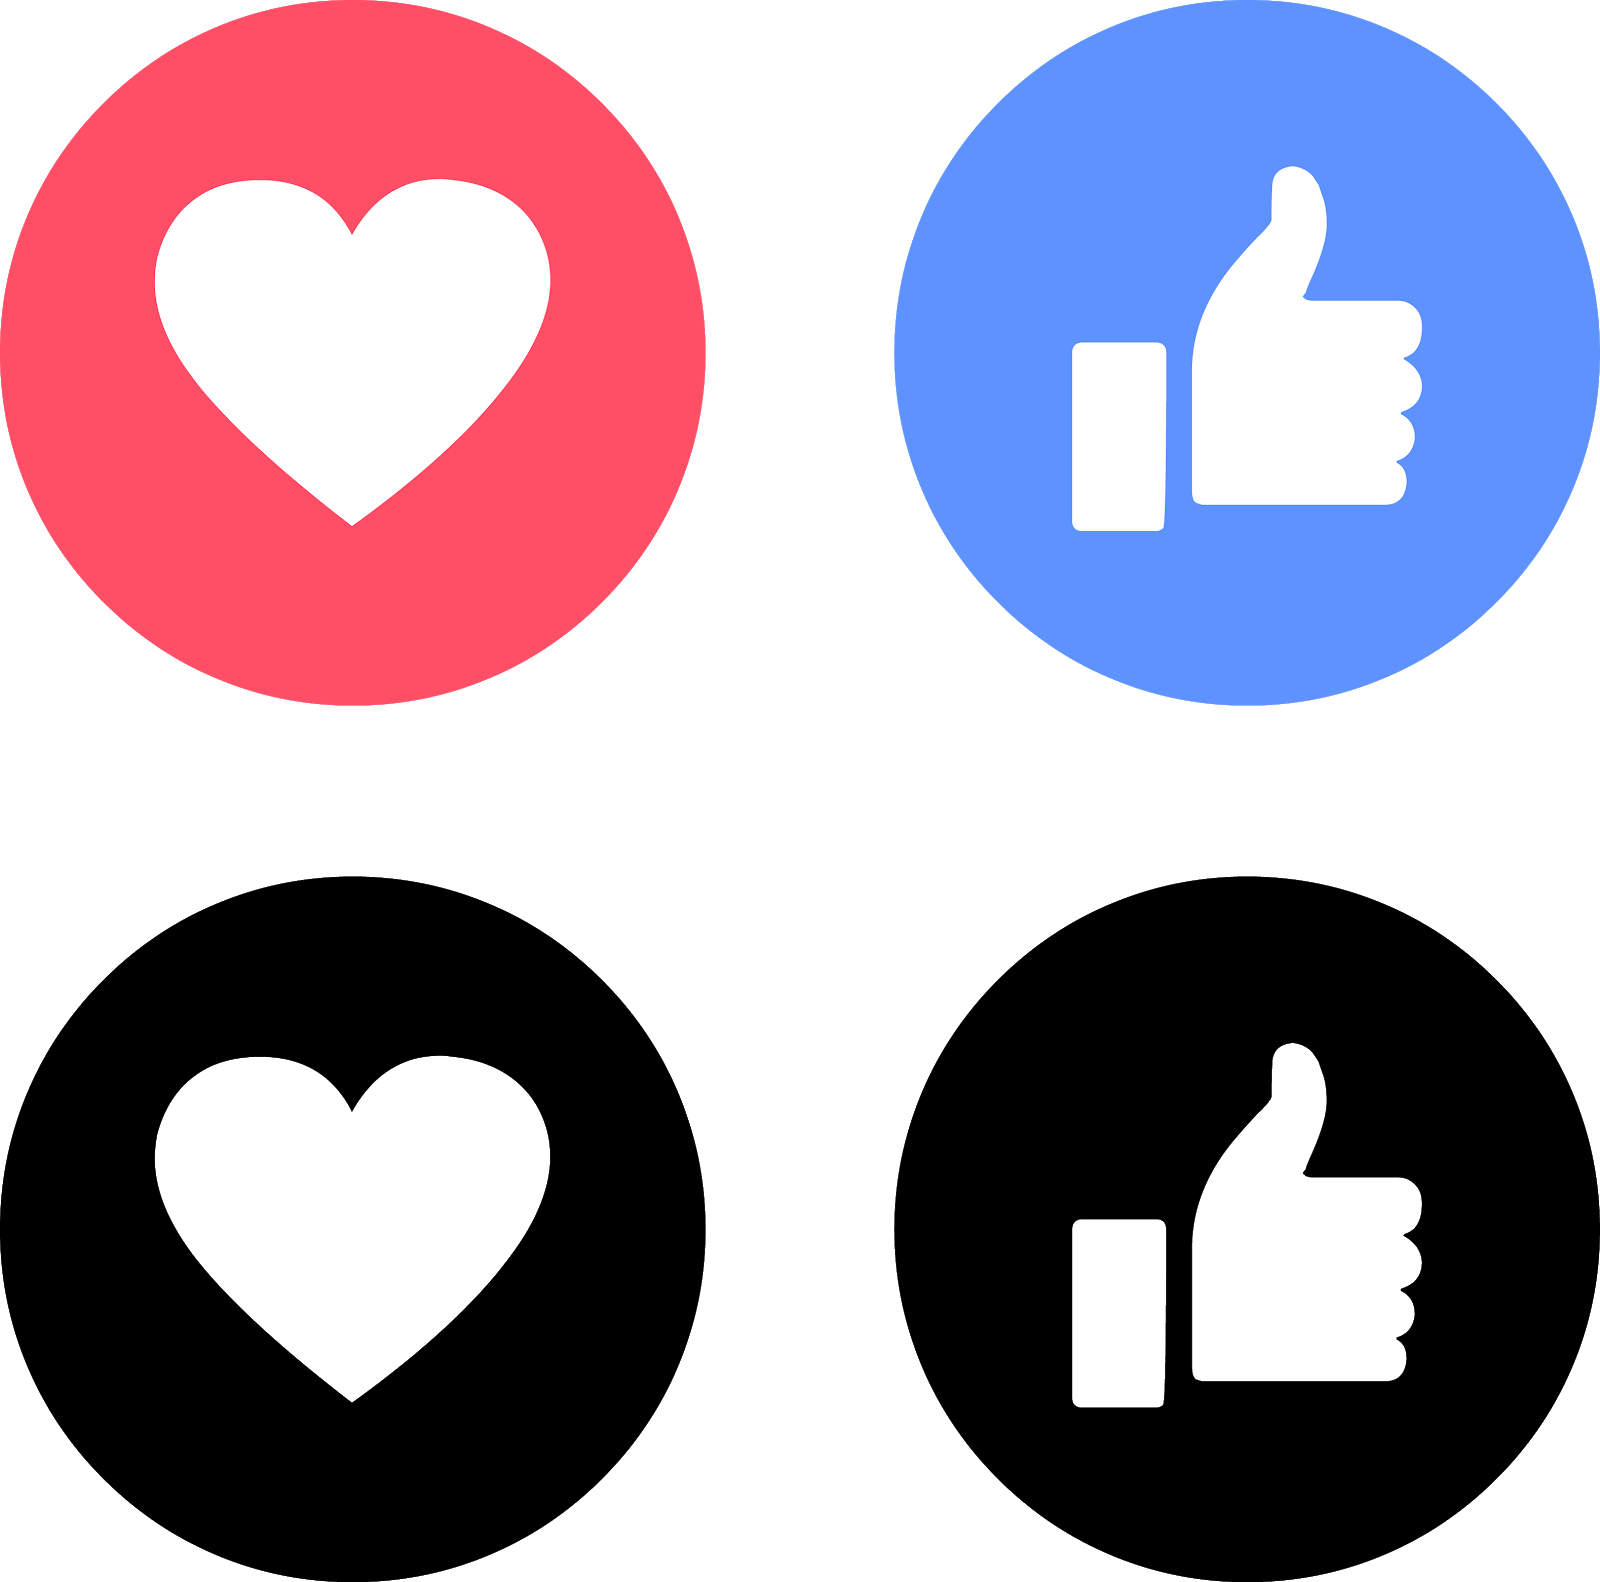 download like love facebook icons svg eps png psd ai.